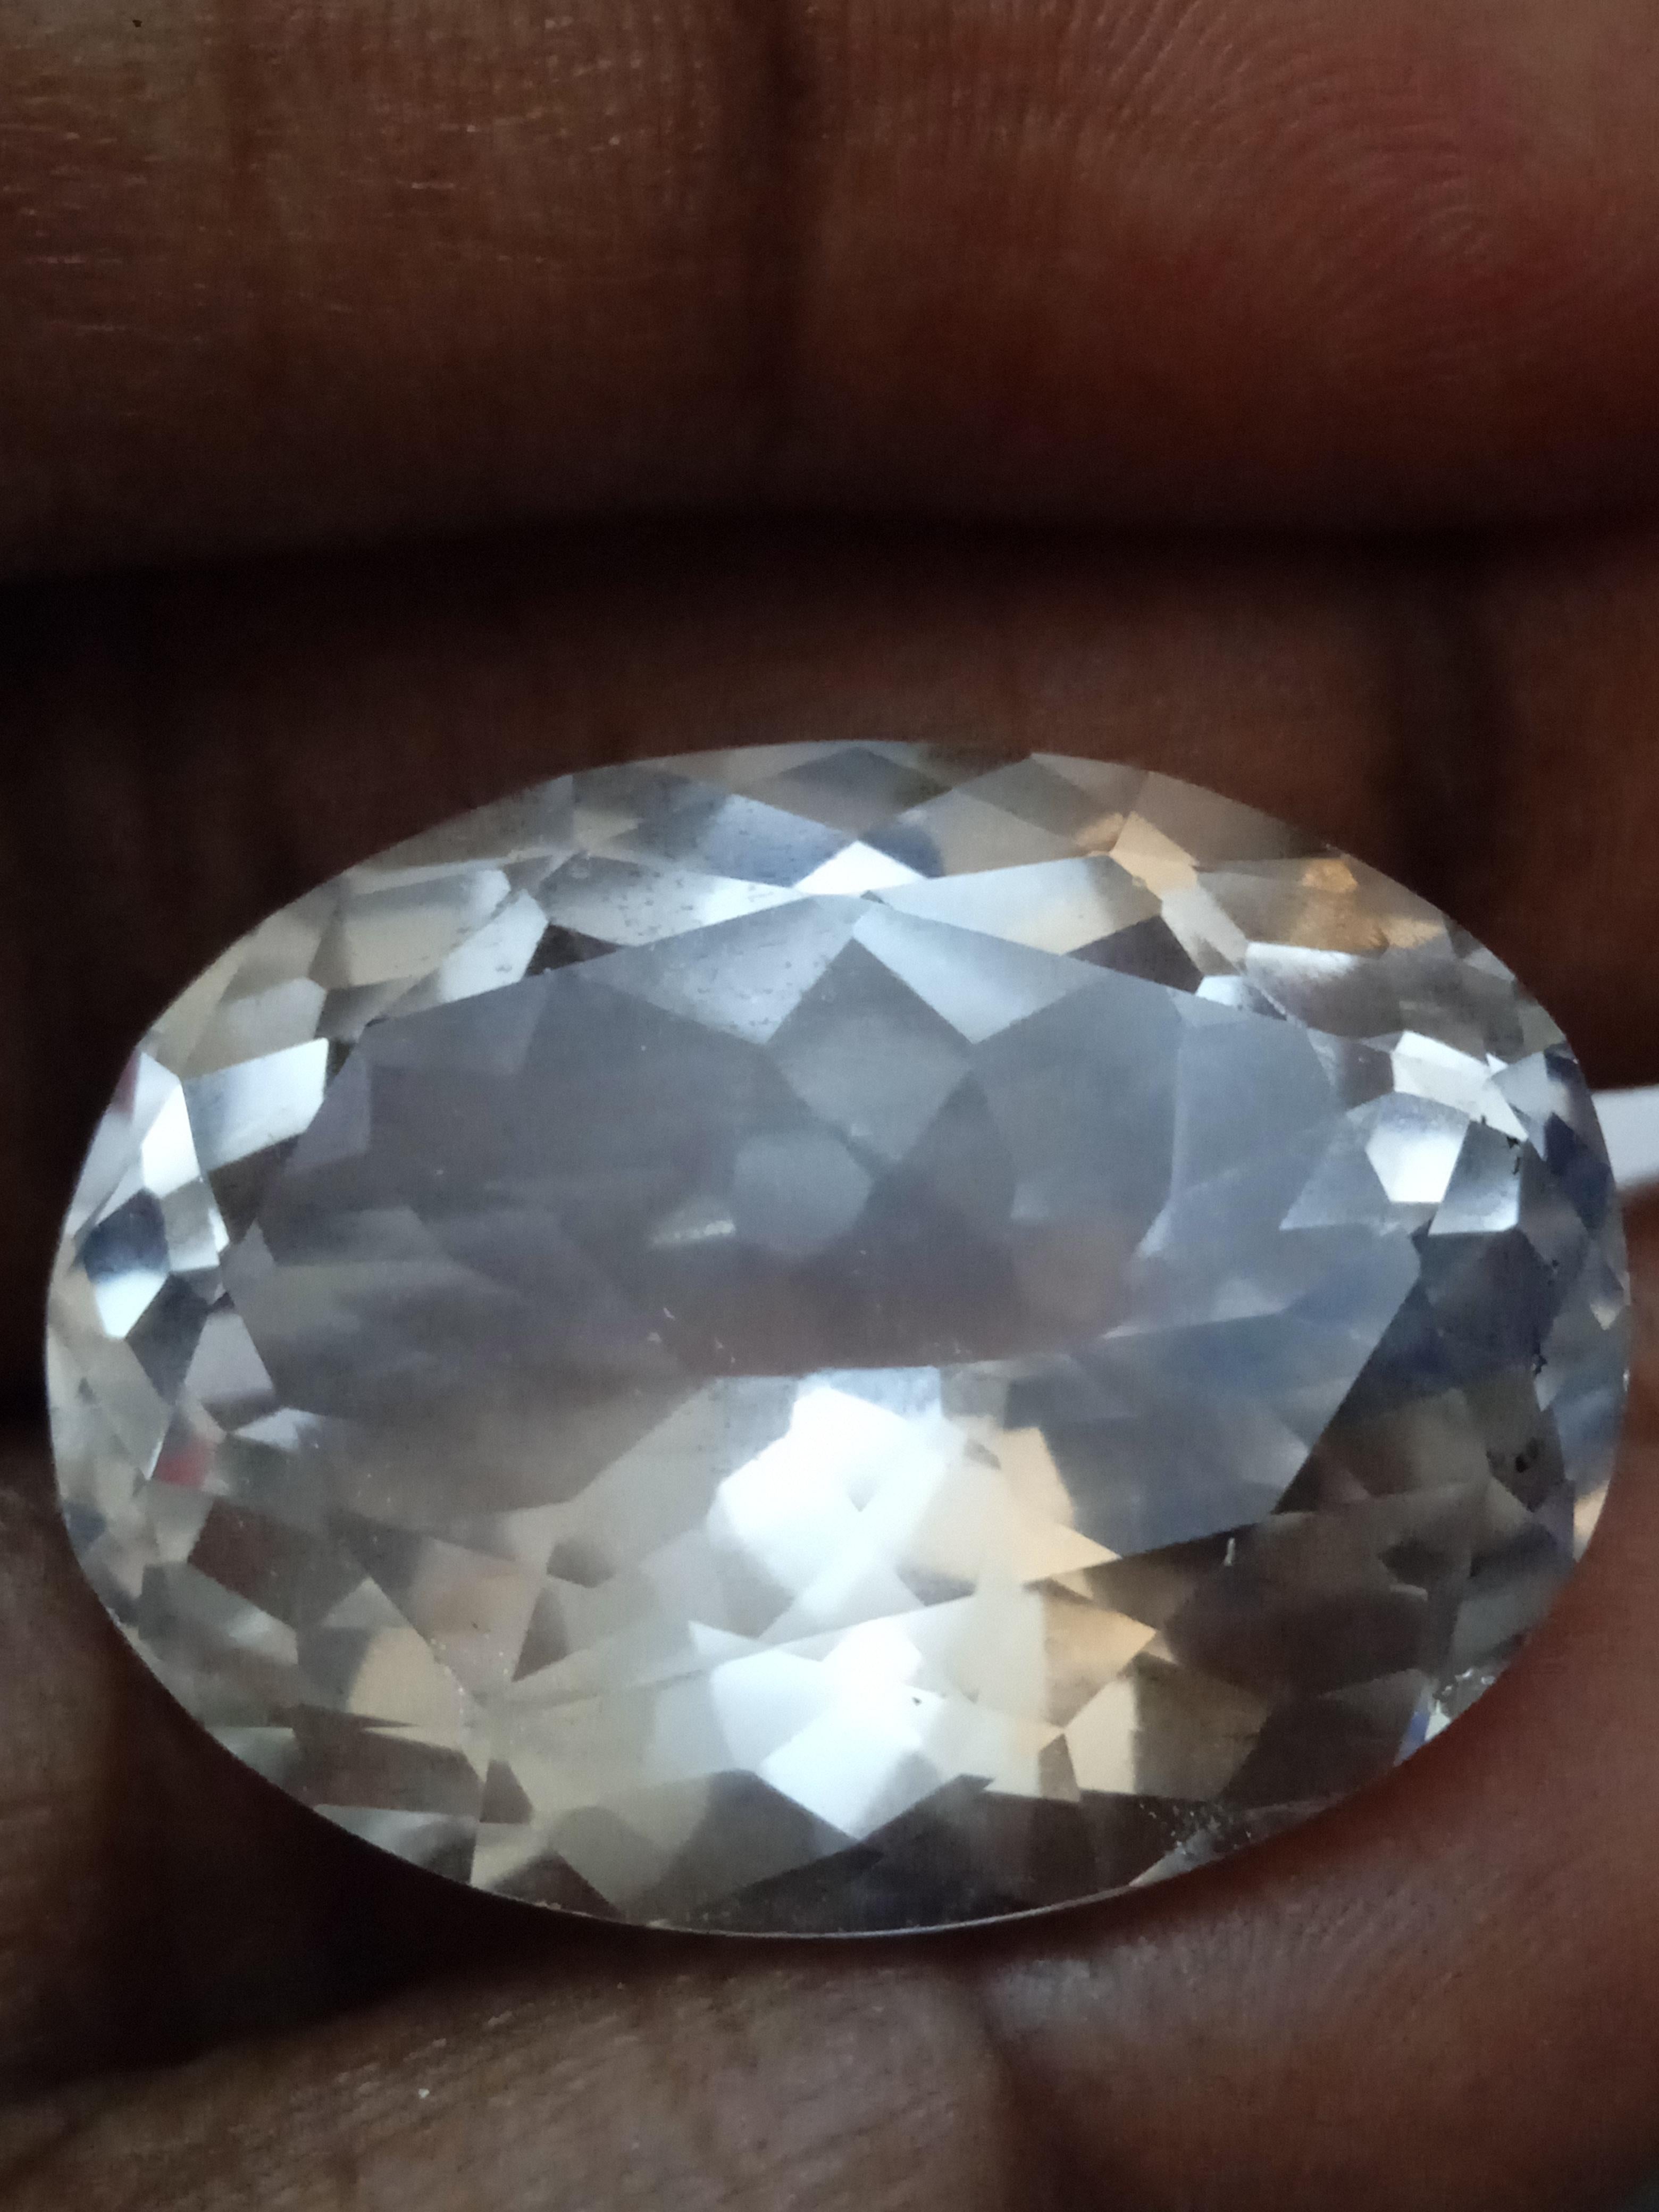 This exquisite White Beryl gemstone boasts excellent cut grade and loupe-clean clarity. Measuring at 10mm in length and 20mm in width, this oval-shaped gem was naturally created and has not been enhanced in any way. With a total weight of 49 carats,